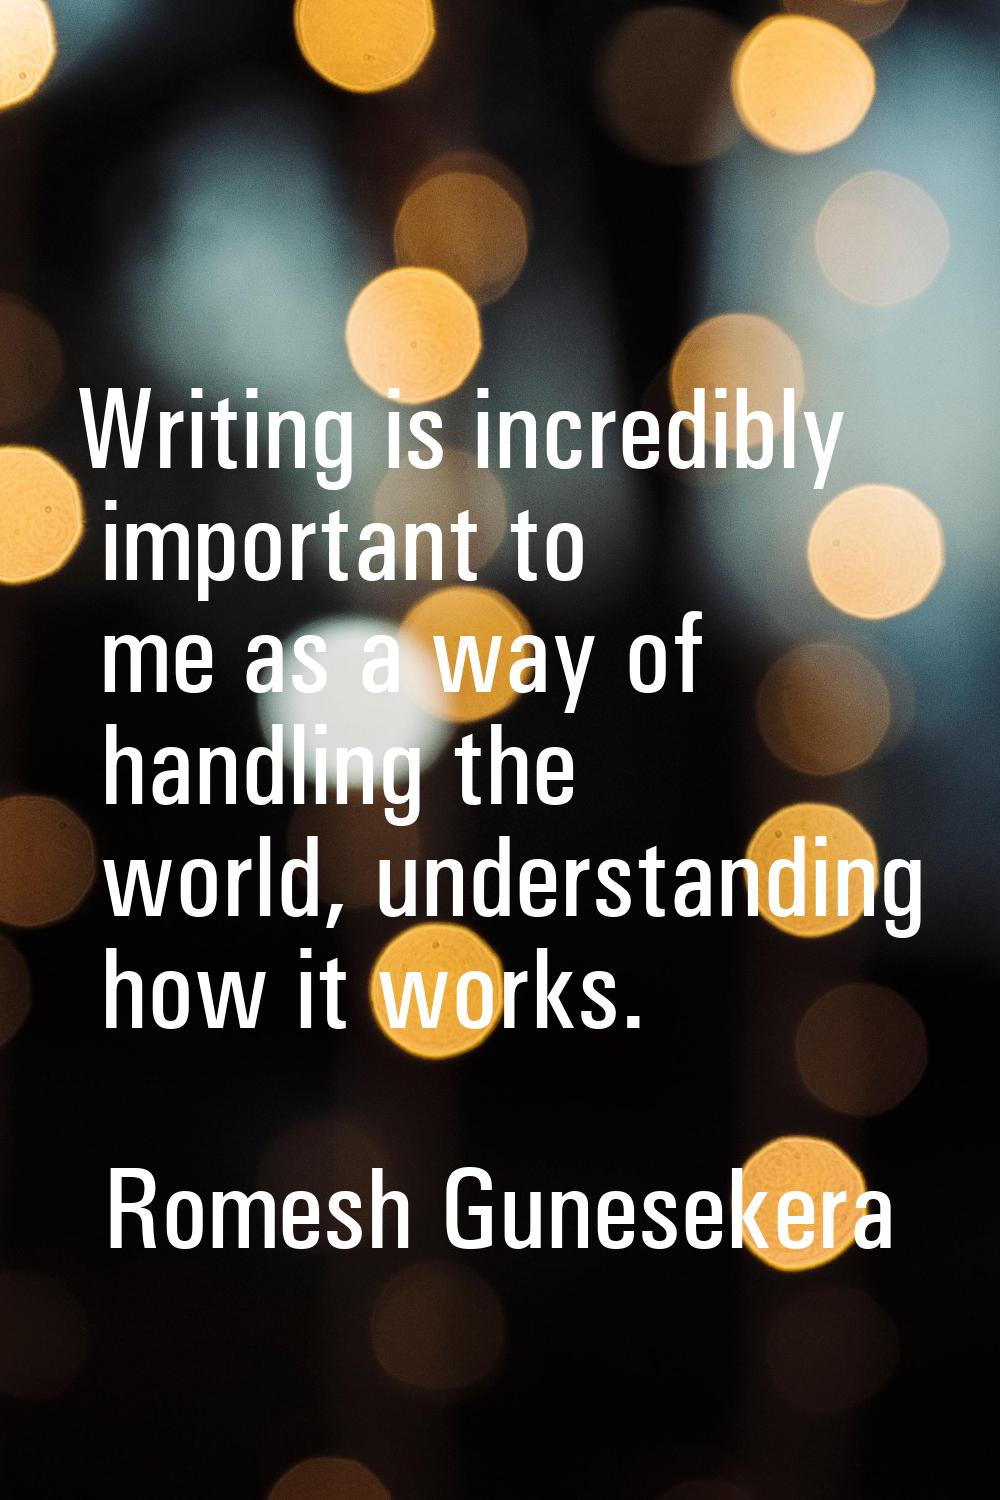 Writing is incredibly important to me as a way of handling the world, understanding how it works.